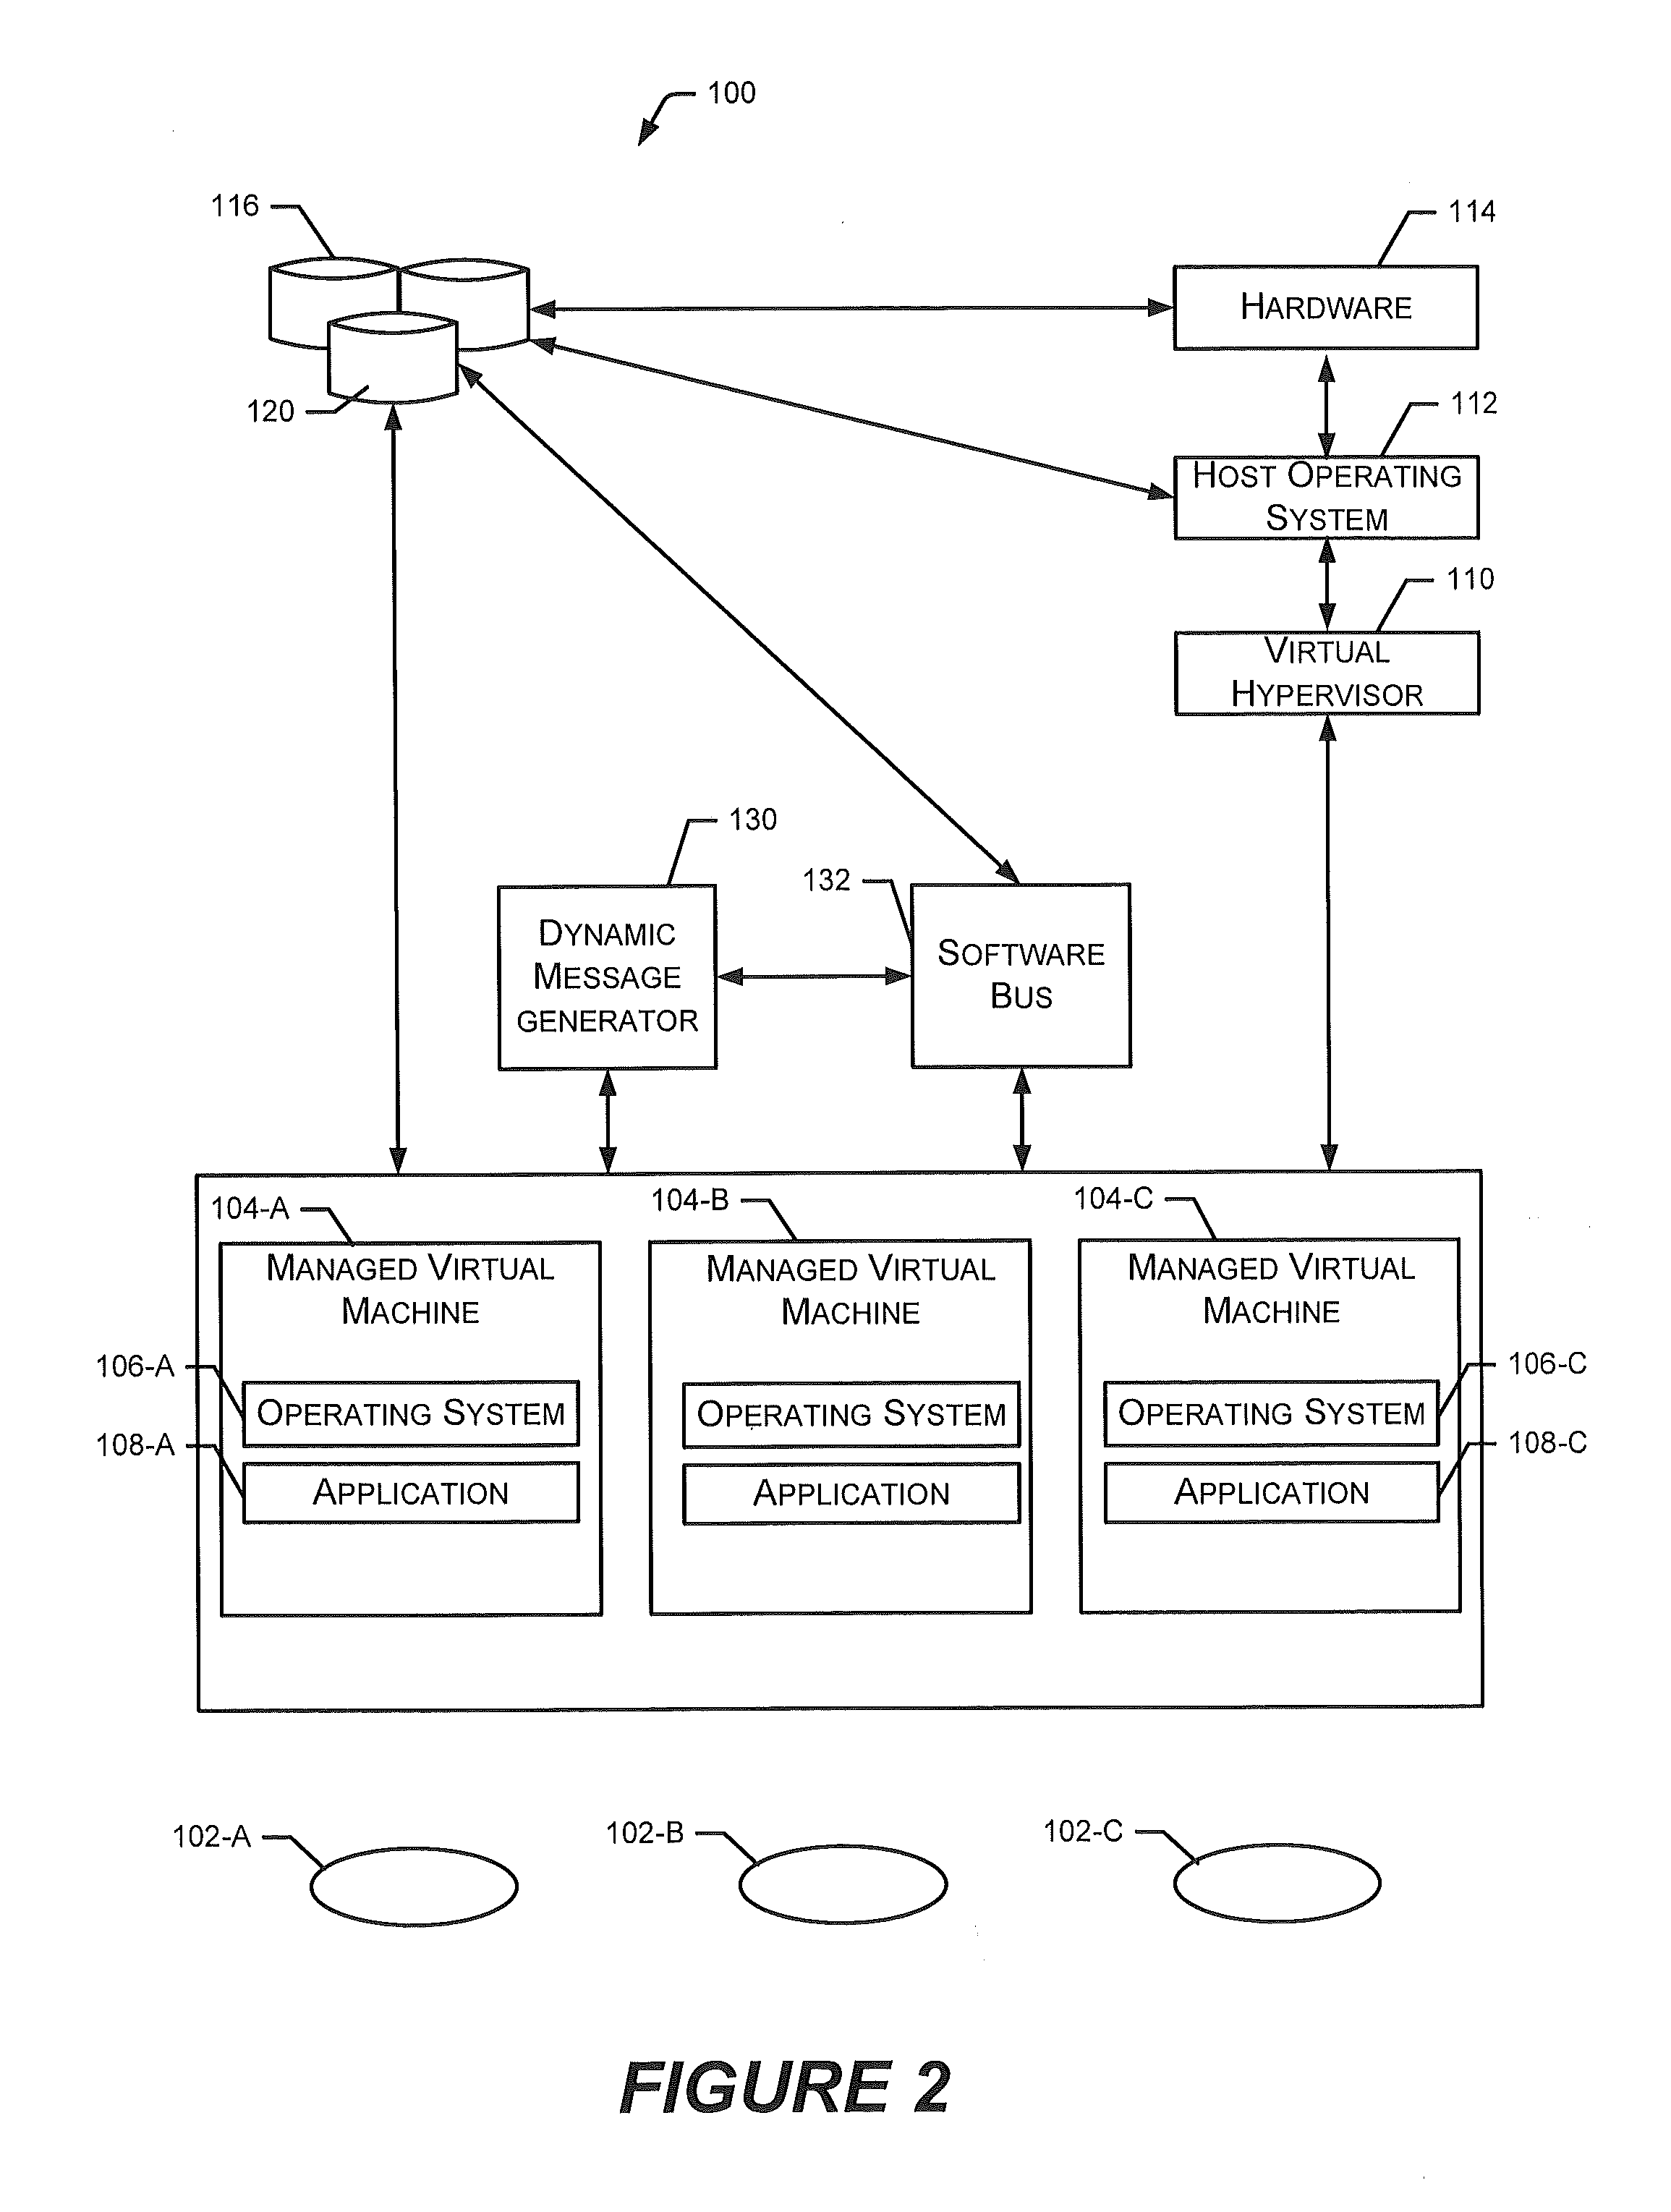 Bus-based dynamic evaluation with dynamic data lookups